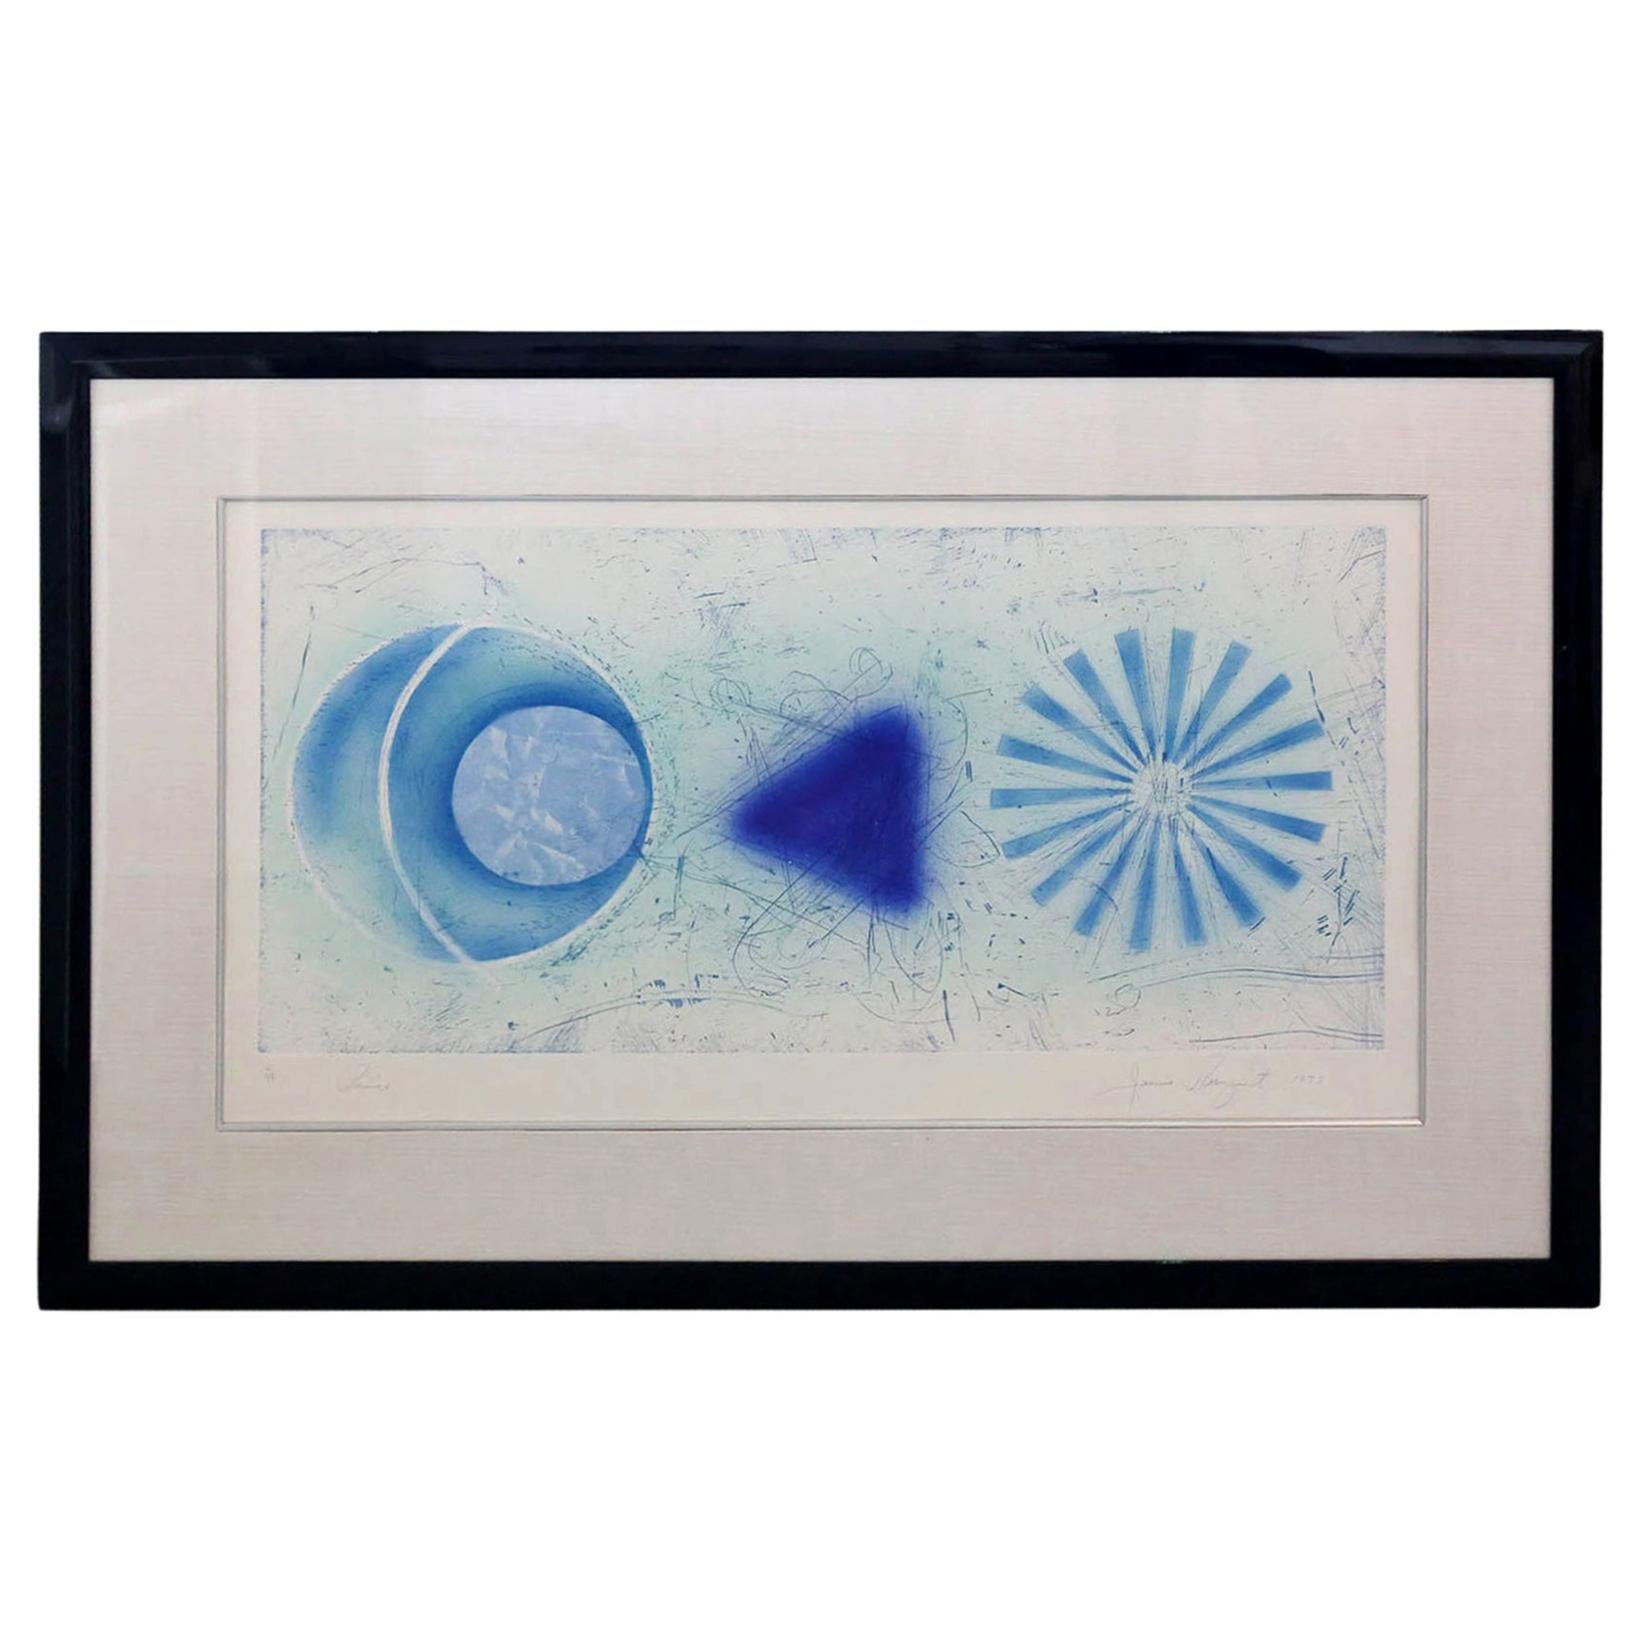 Blue & White J. Rosenquist Signed & Numbered Photo-Etching Aquatint, Rinse, 1978 For Sale